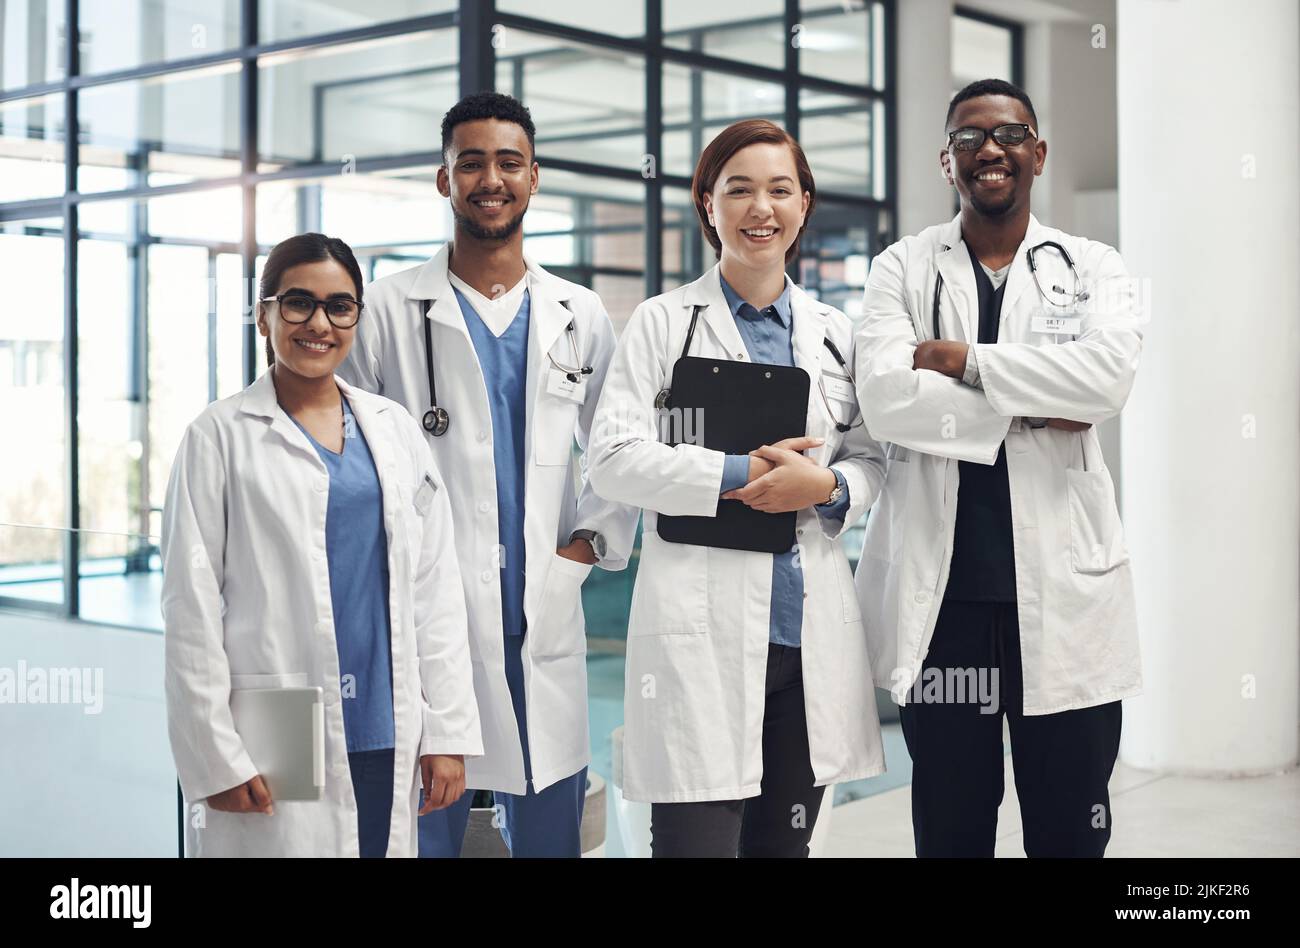 A dedicated team of experts. a group of medical staff together at work. Stock Photo